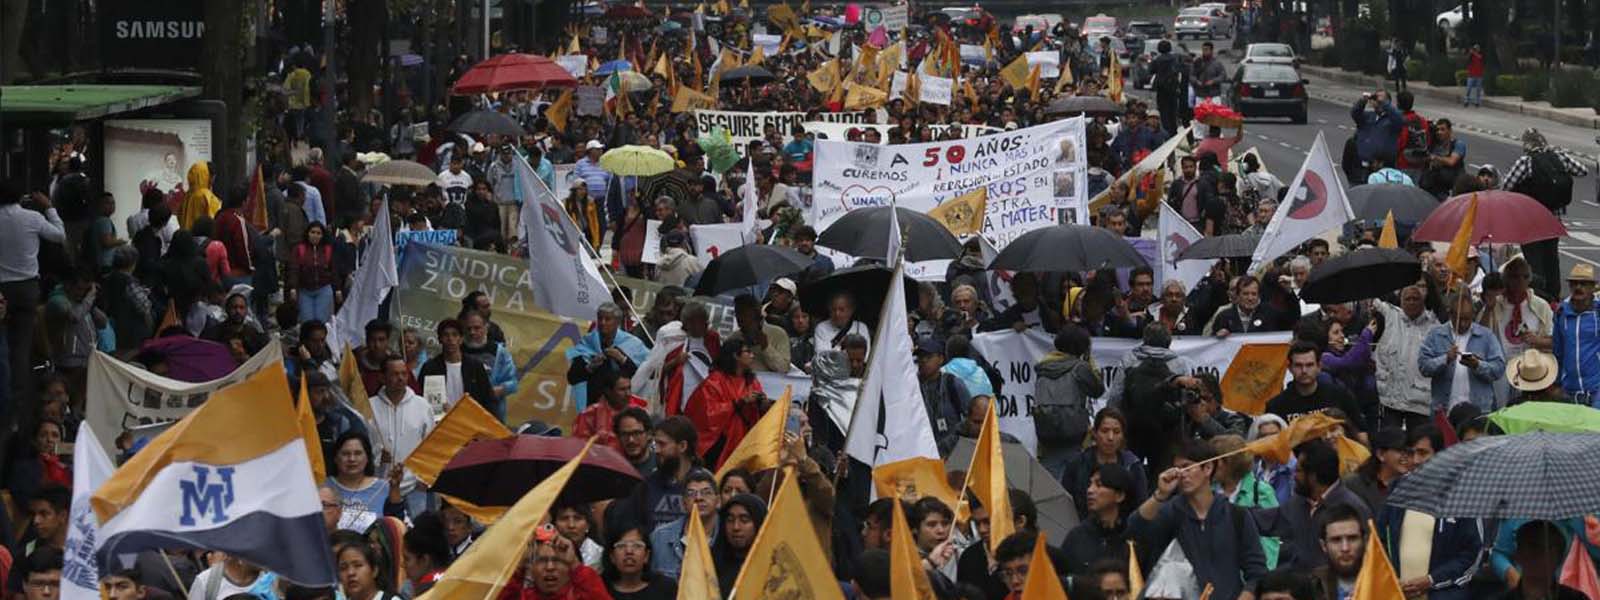 Mexican students portest against campus violence